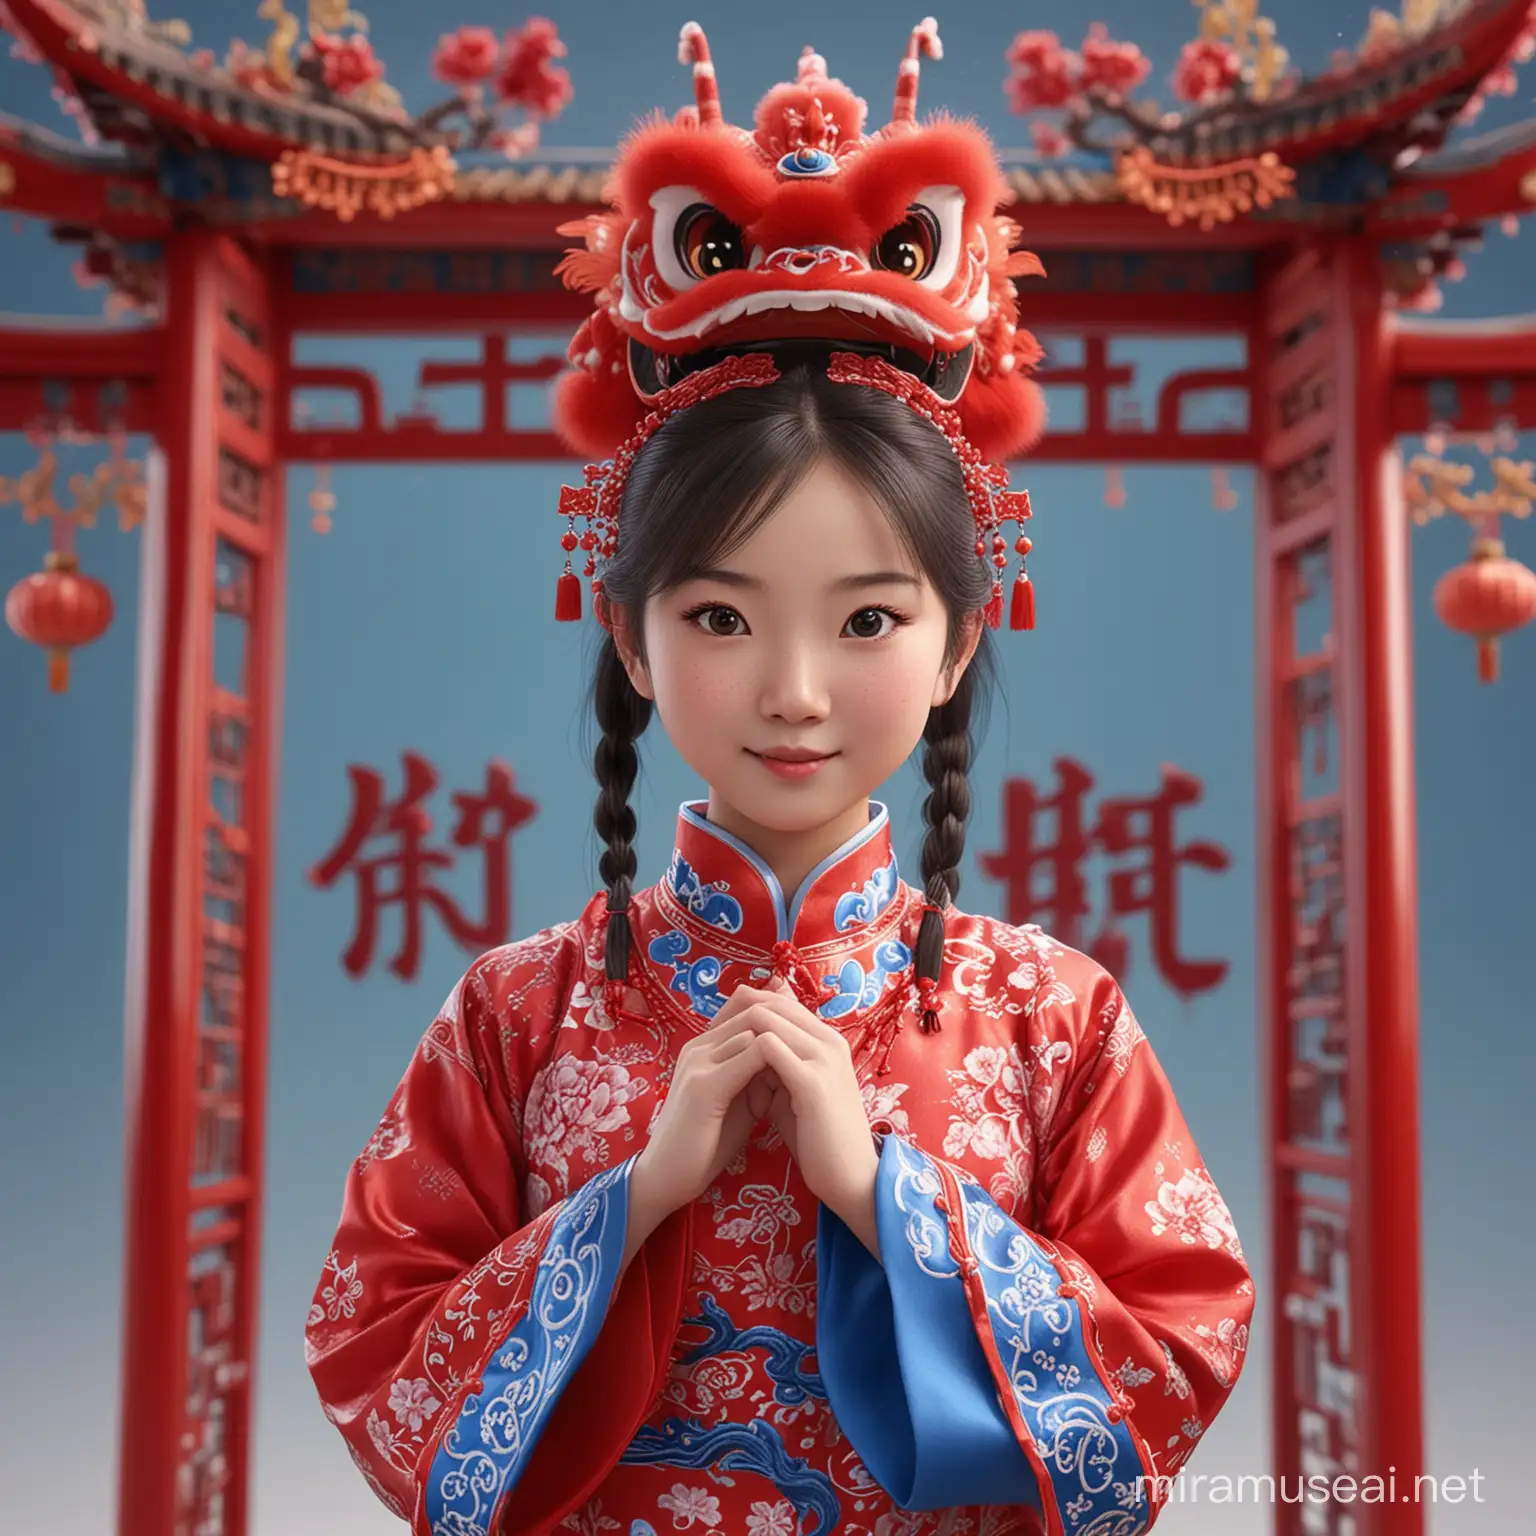 3D animation of a Chinese girl wearing a red lion dance costume with blue details and sparkling beads. The girl is also wearing traditional Chinese clothing in red with dragon embroidery and a pink tie. The background is a traditional Chinese gate.